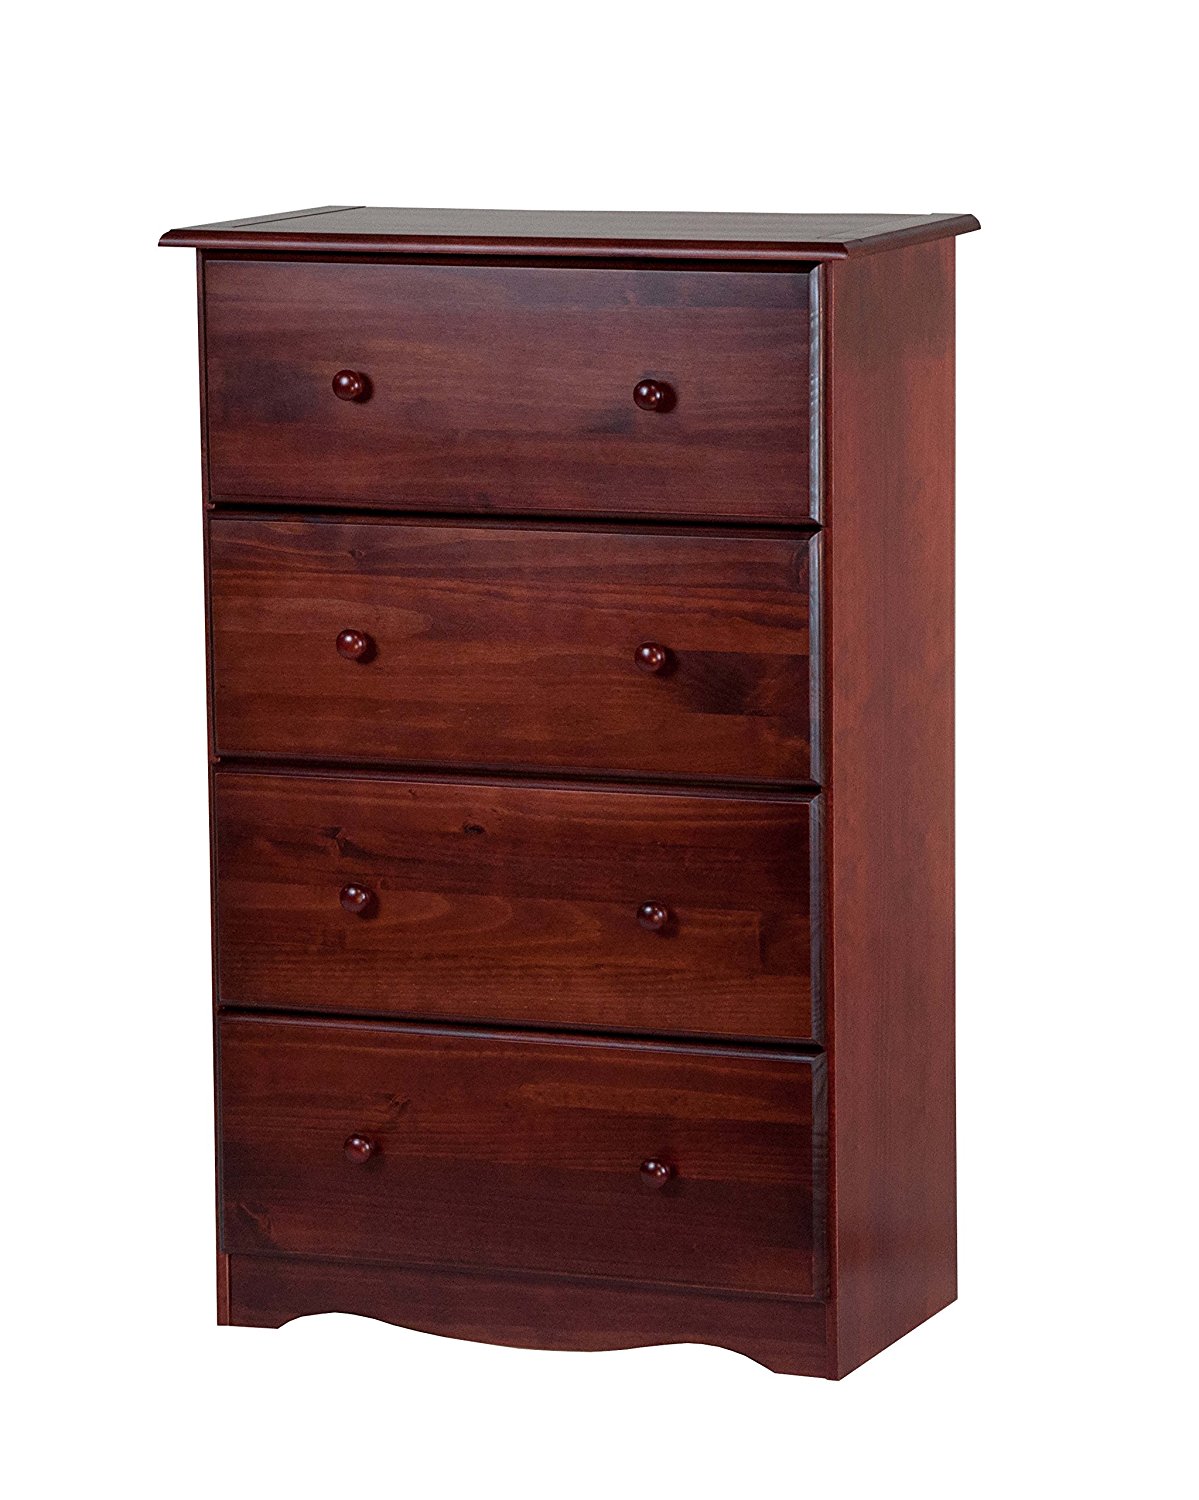 100% Solid Wood 4-Super Jumbo Drawer Chest by Palace Imports, Mahogany Color, 32”W x 48.5”H x 17”D. Metal Antique Brass Knobs Sold Separately. Requires Assembly